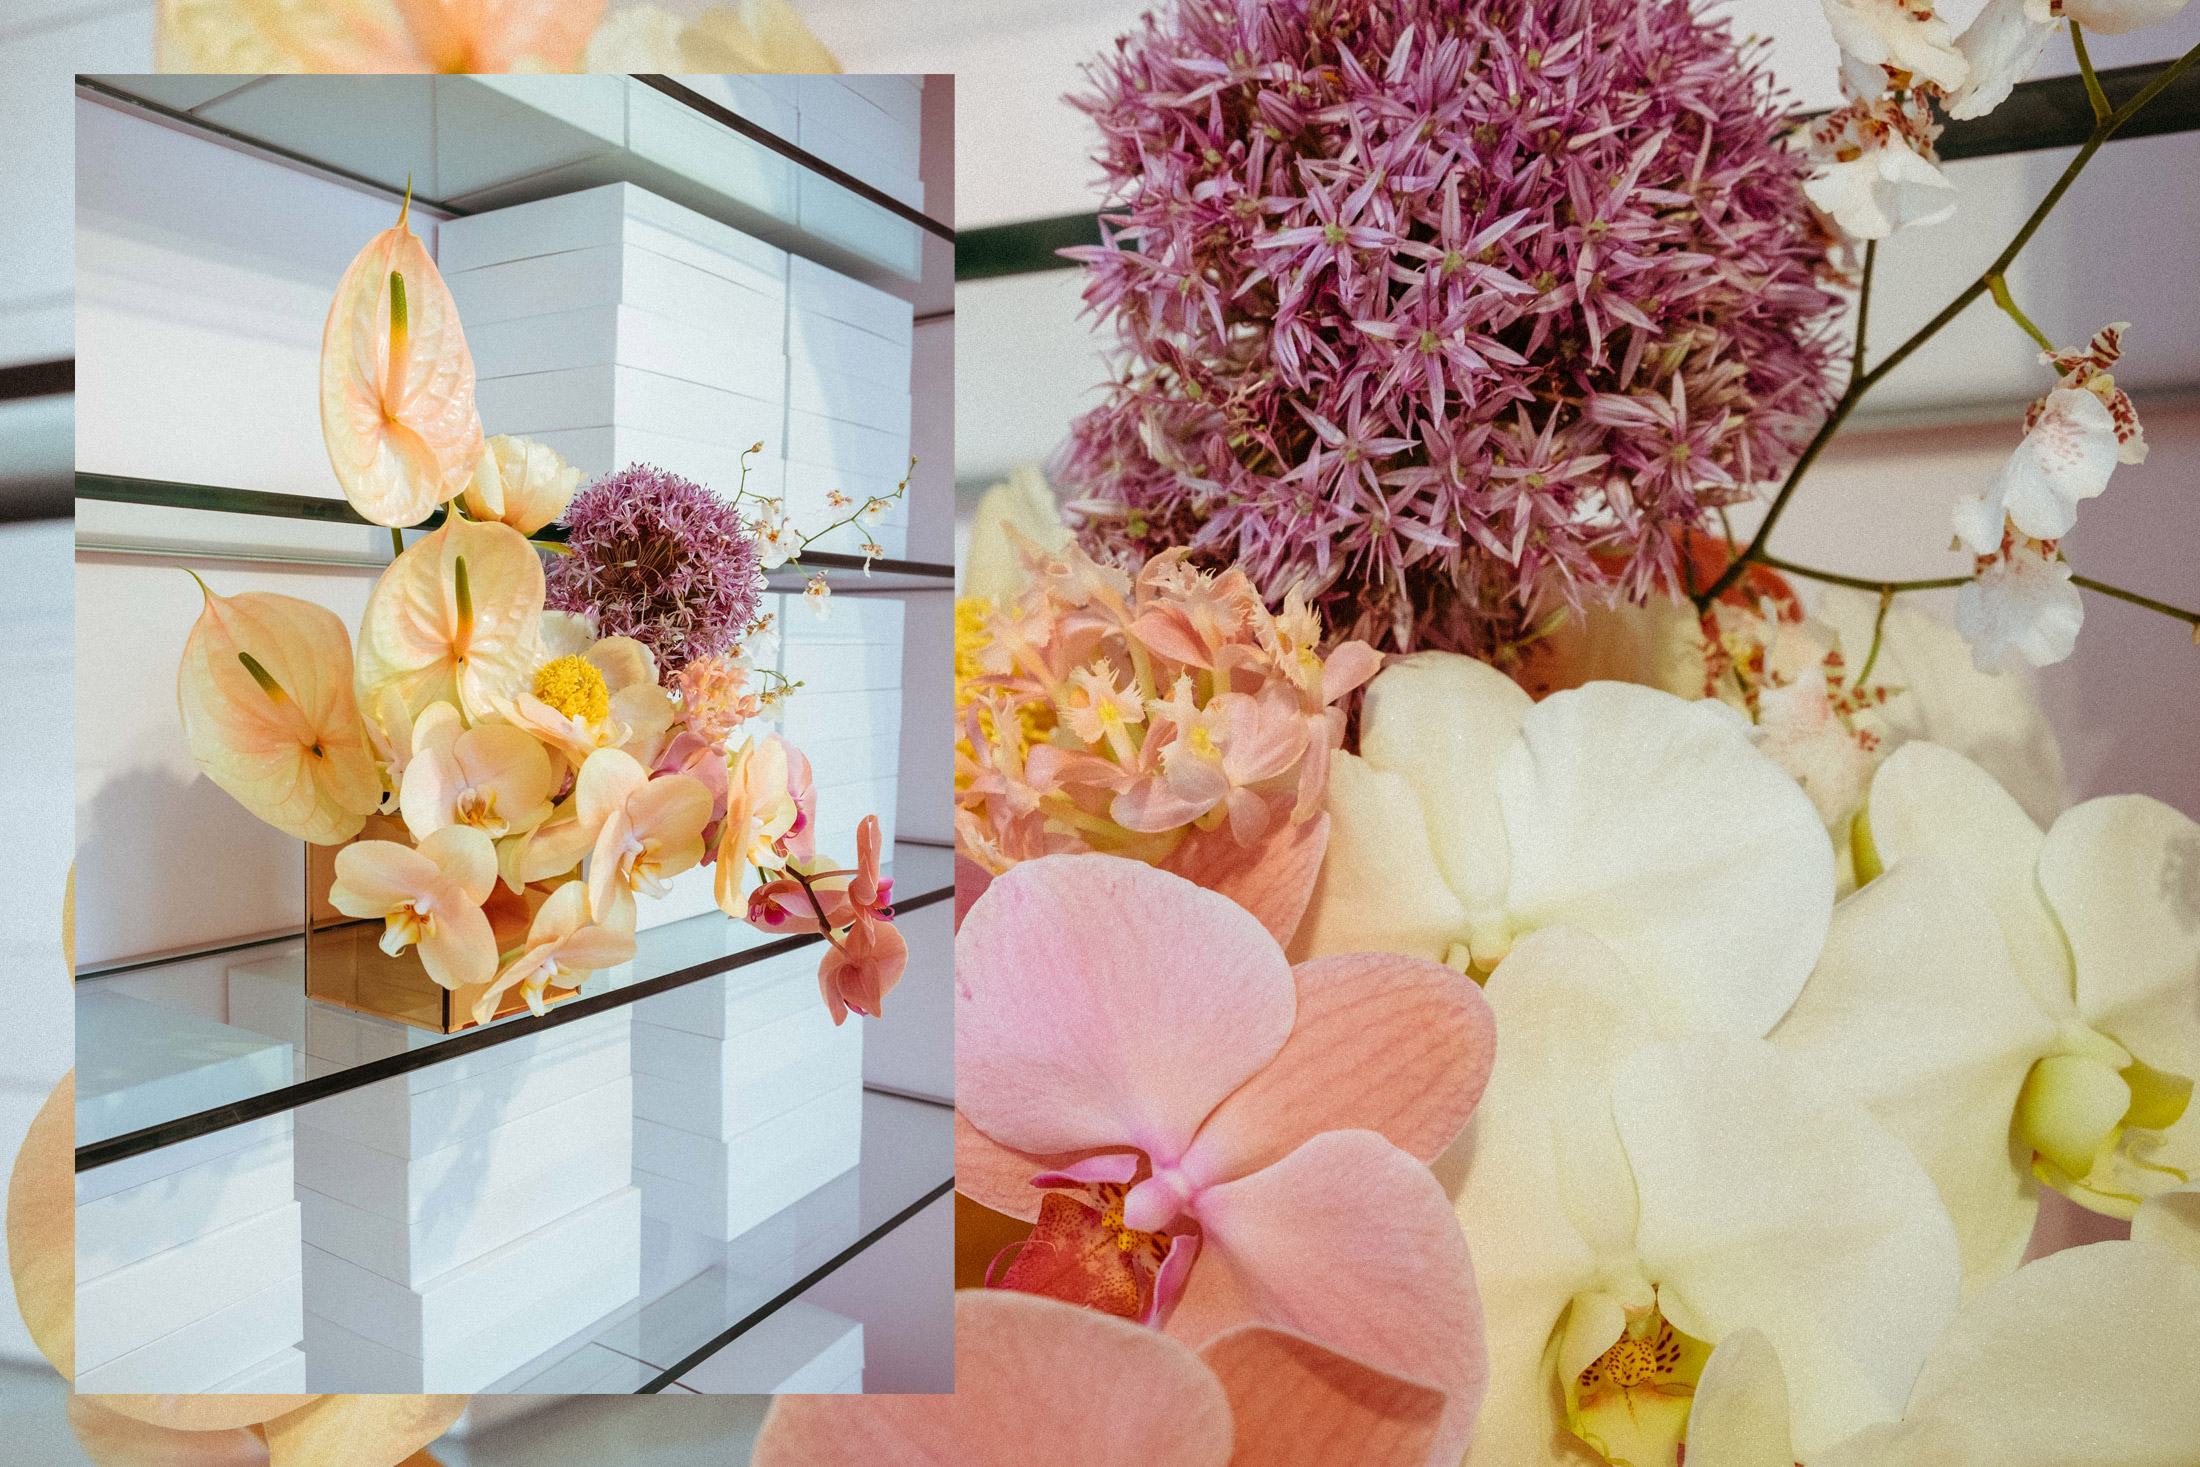 Flowers by Brittany Asch of Brrch Floral in the Glossier Showroom